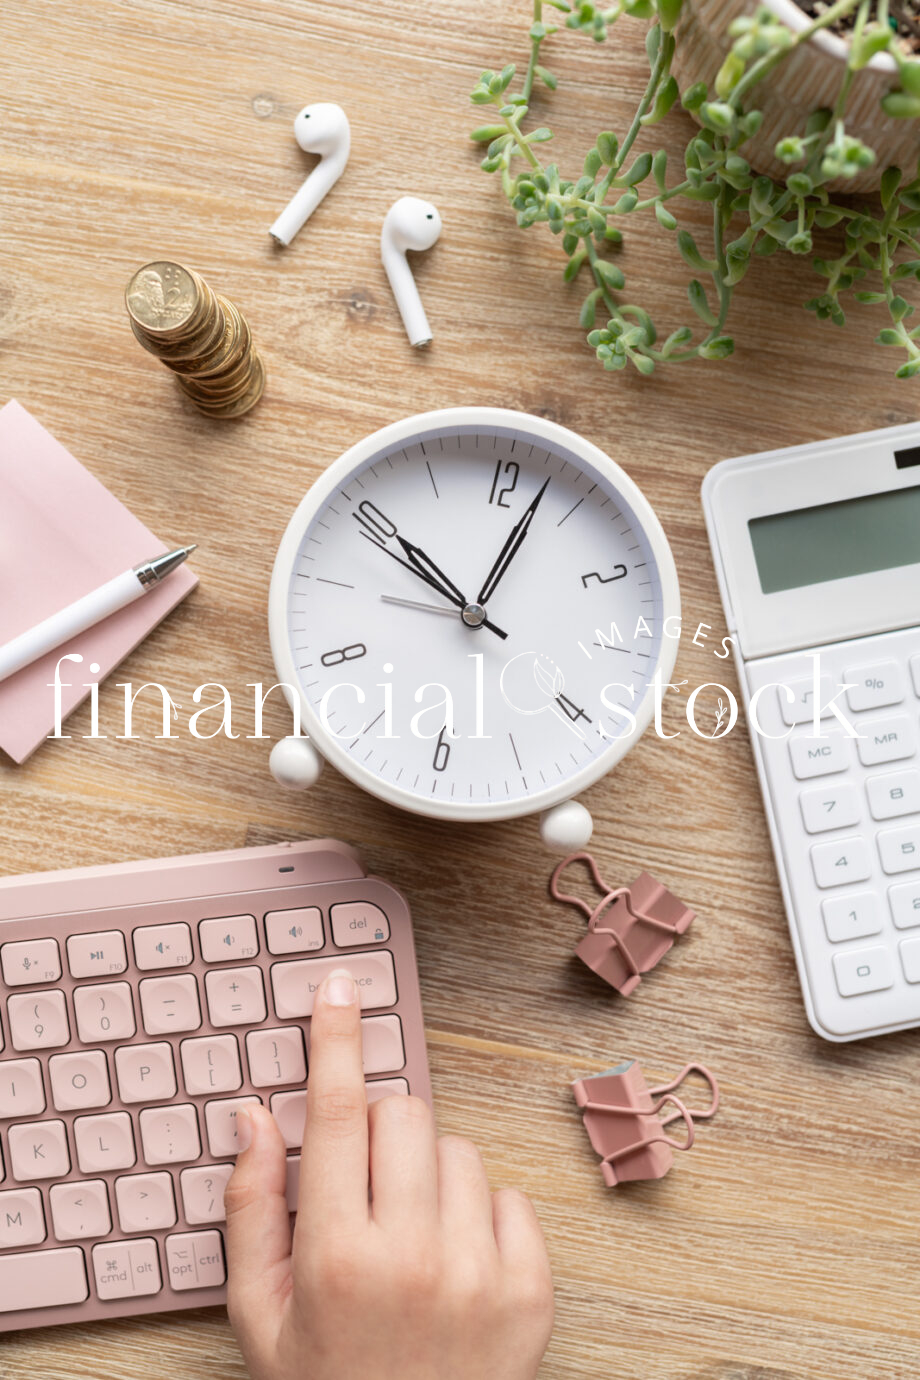 Financial Stock Images - Working from home.